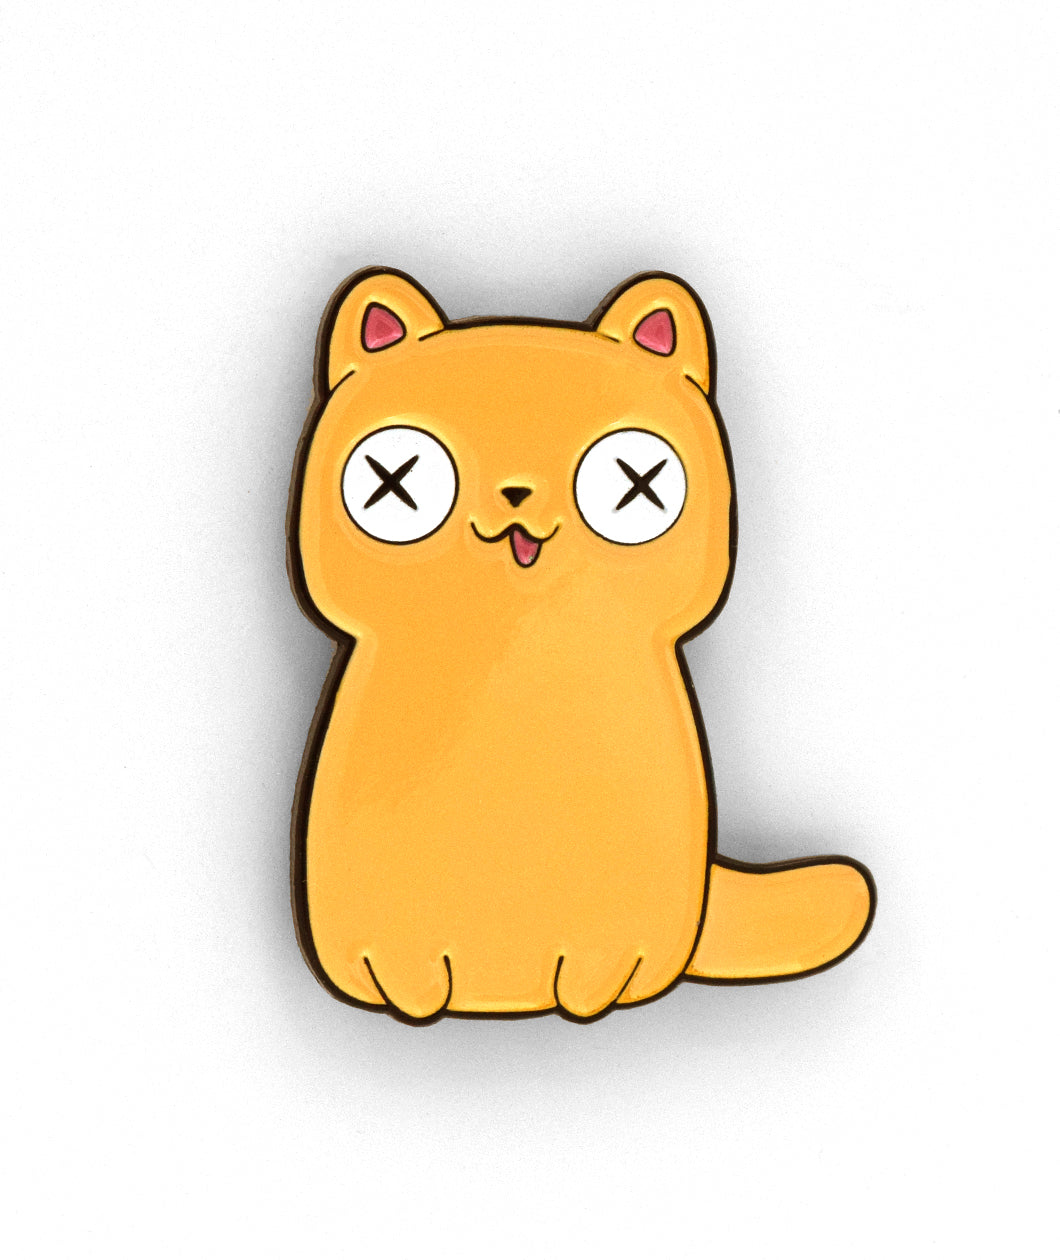 Yellow cat pin with a thin black outline. Two small paws at the bottom with a tail coming out at the bottom right. Tongue is hanging out and eyes are white with two black X’s in its eyes - from Physics Girl